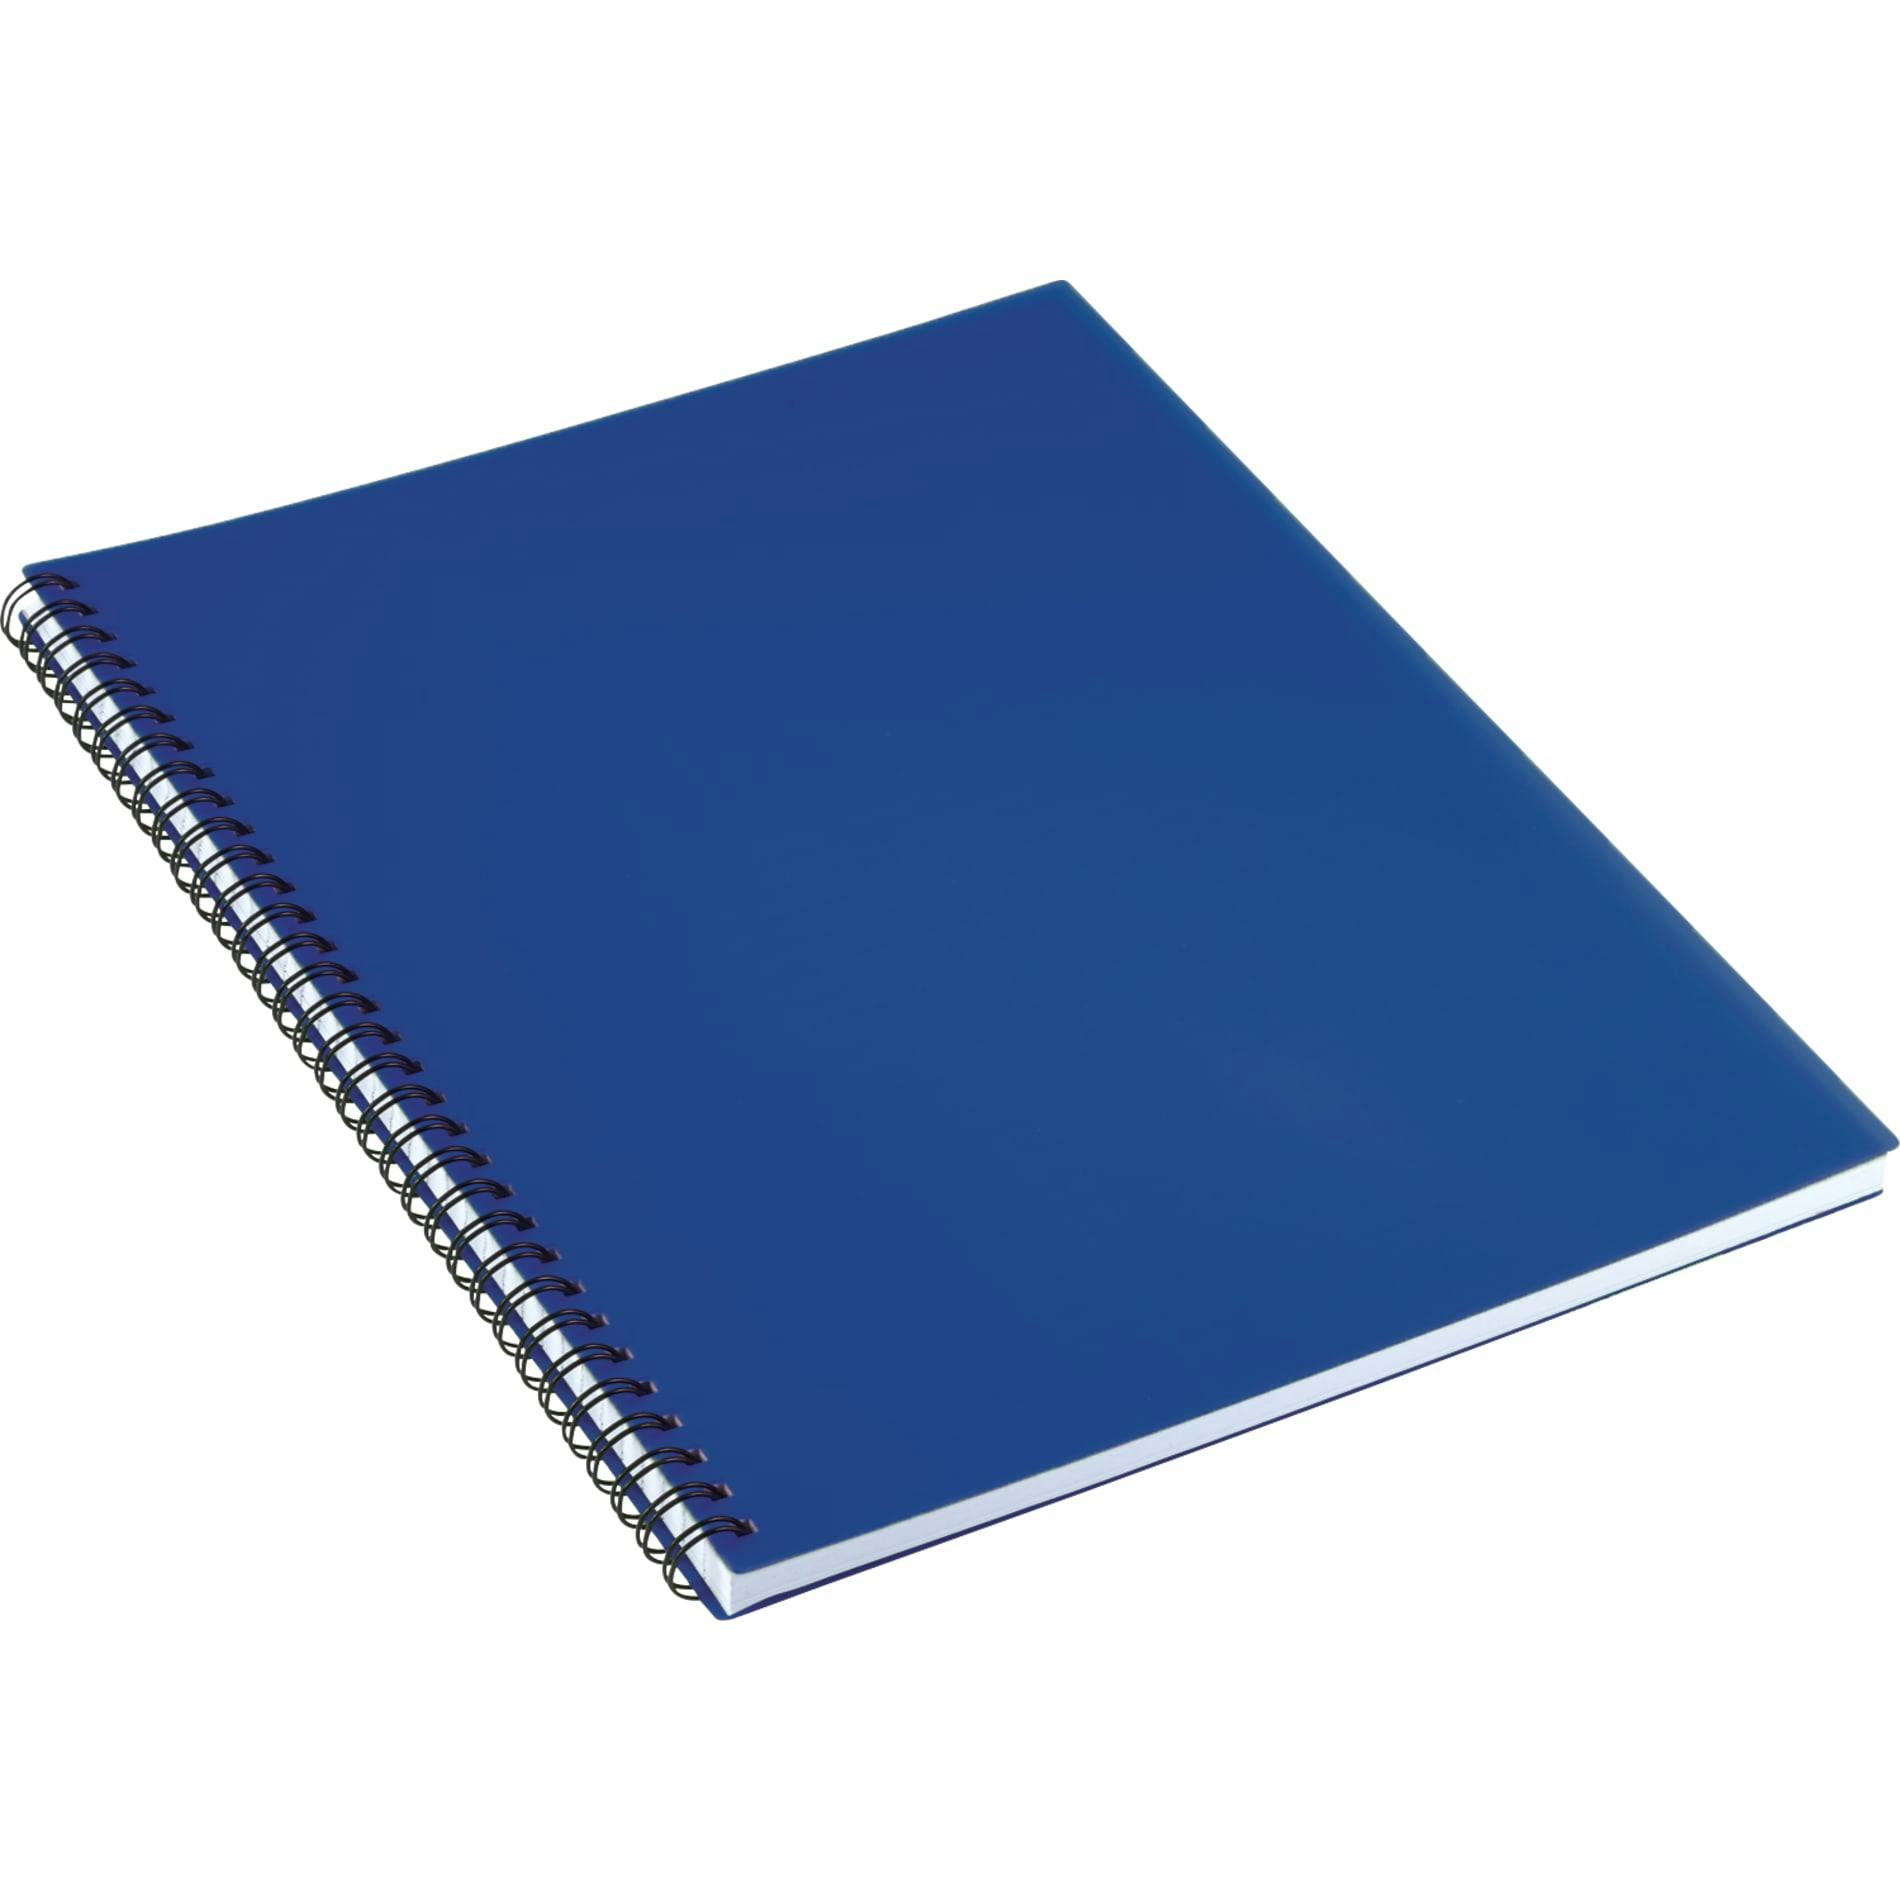 8.5" x 11" Lg Business Spiral Notebook - additional Image 2